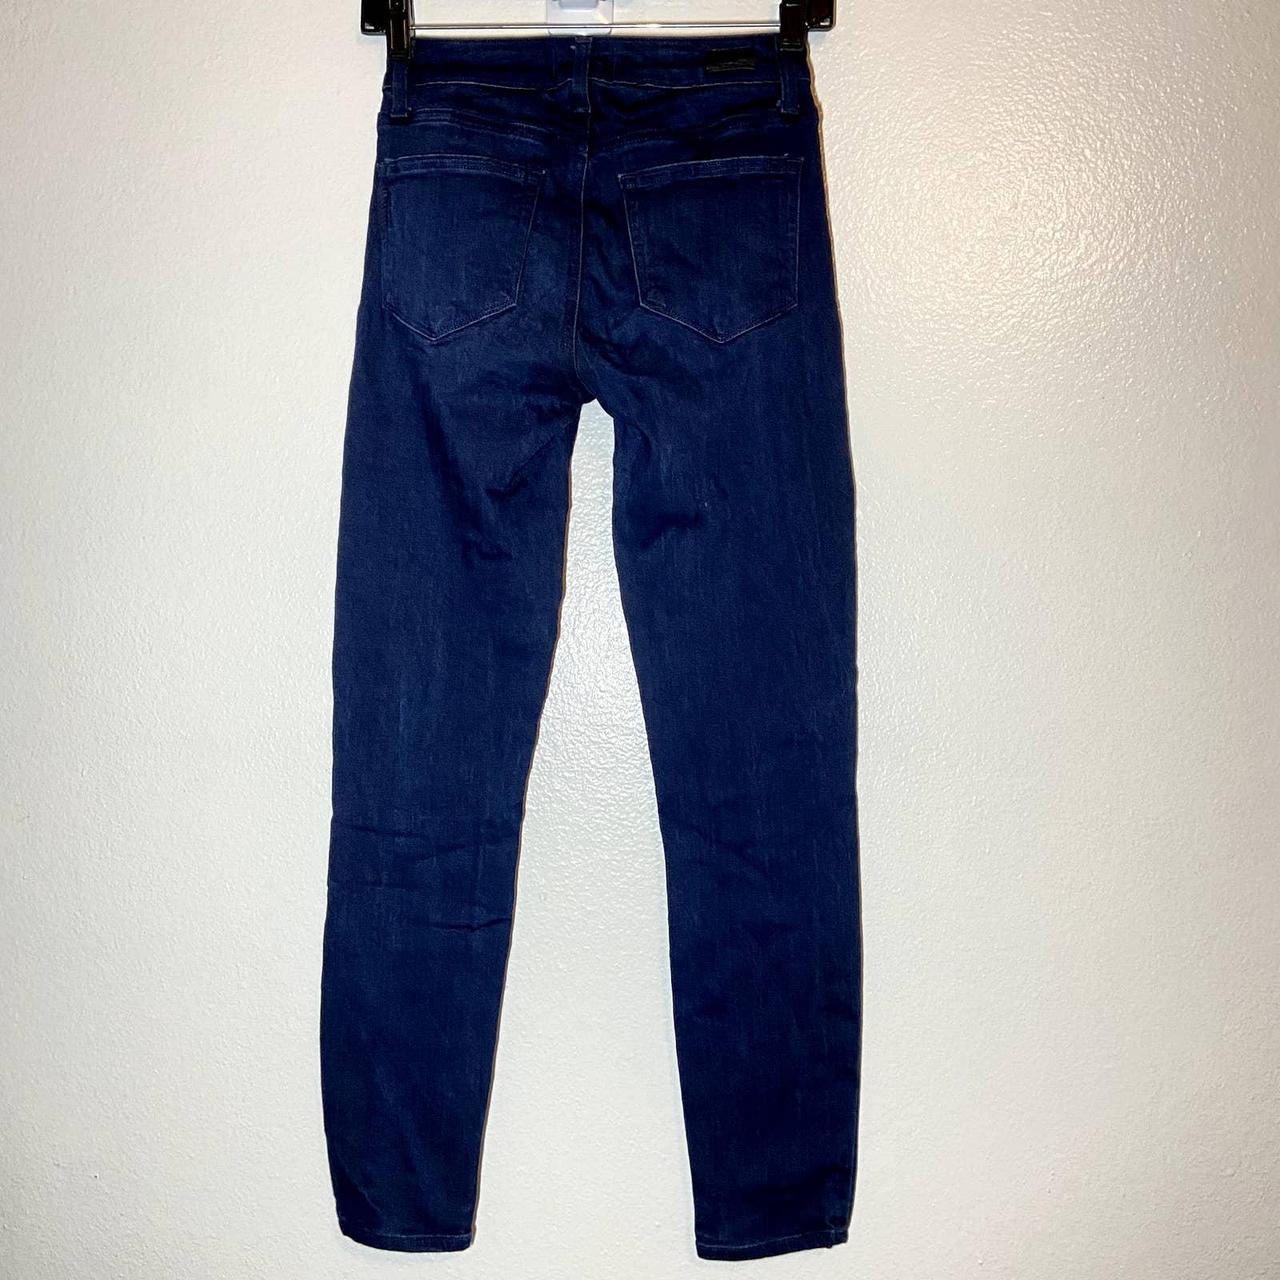 Product Image 4 - PAIGE Verdugo Ankle Crop Jeans